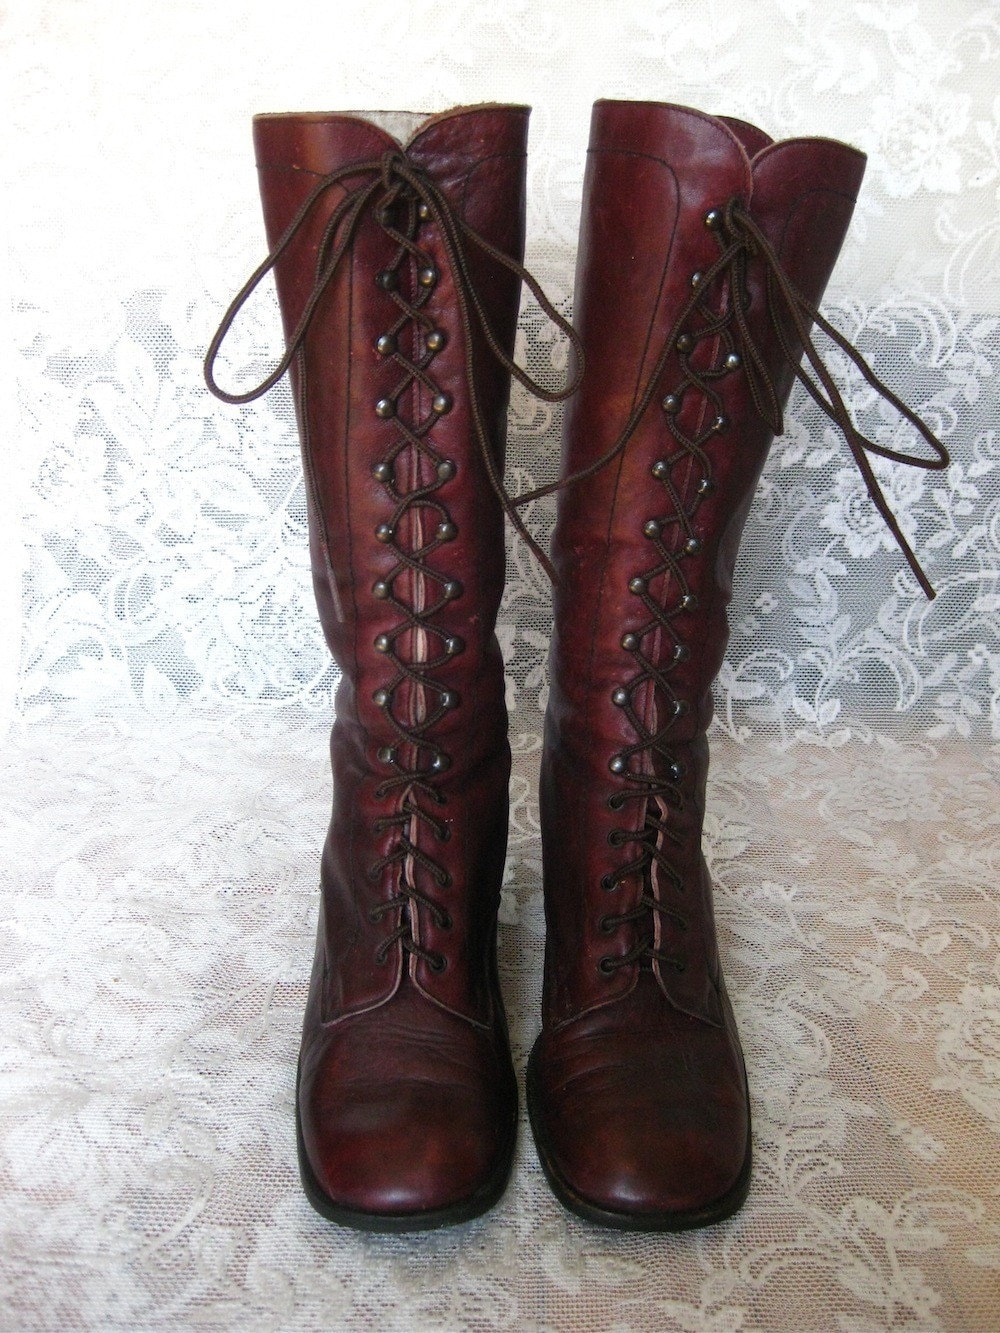 Vintage Red Leather Lace Up Boots Women's size by NeedVintageShoes